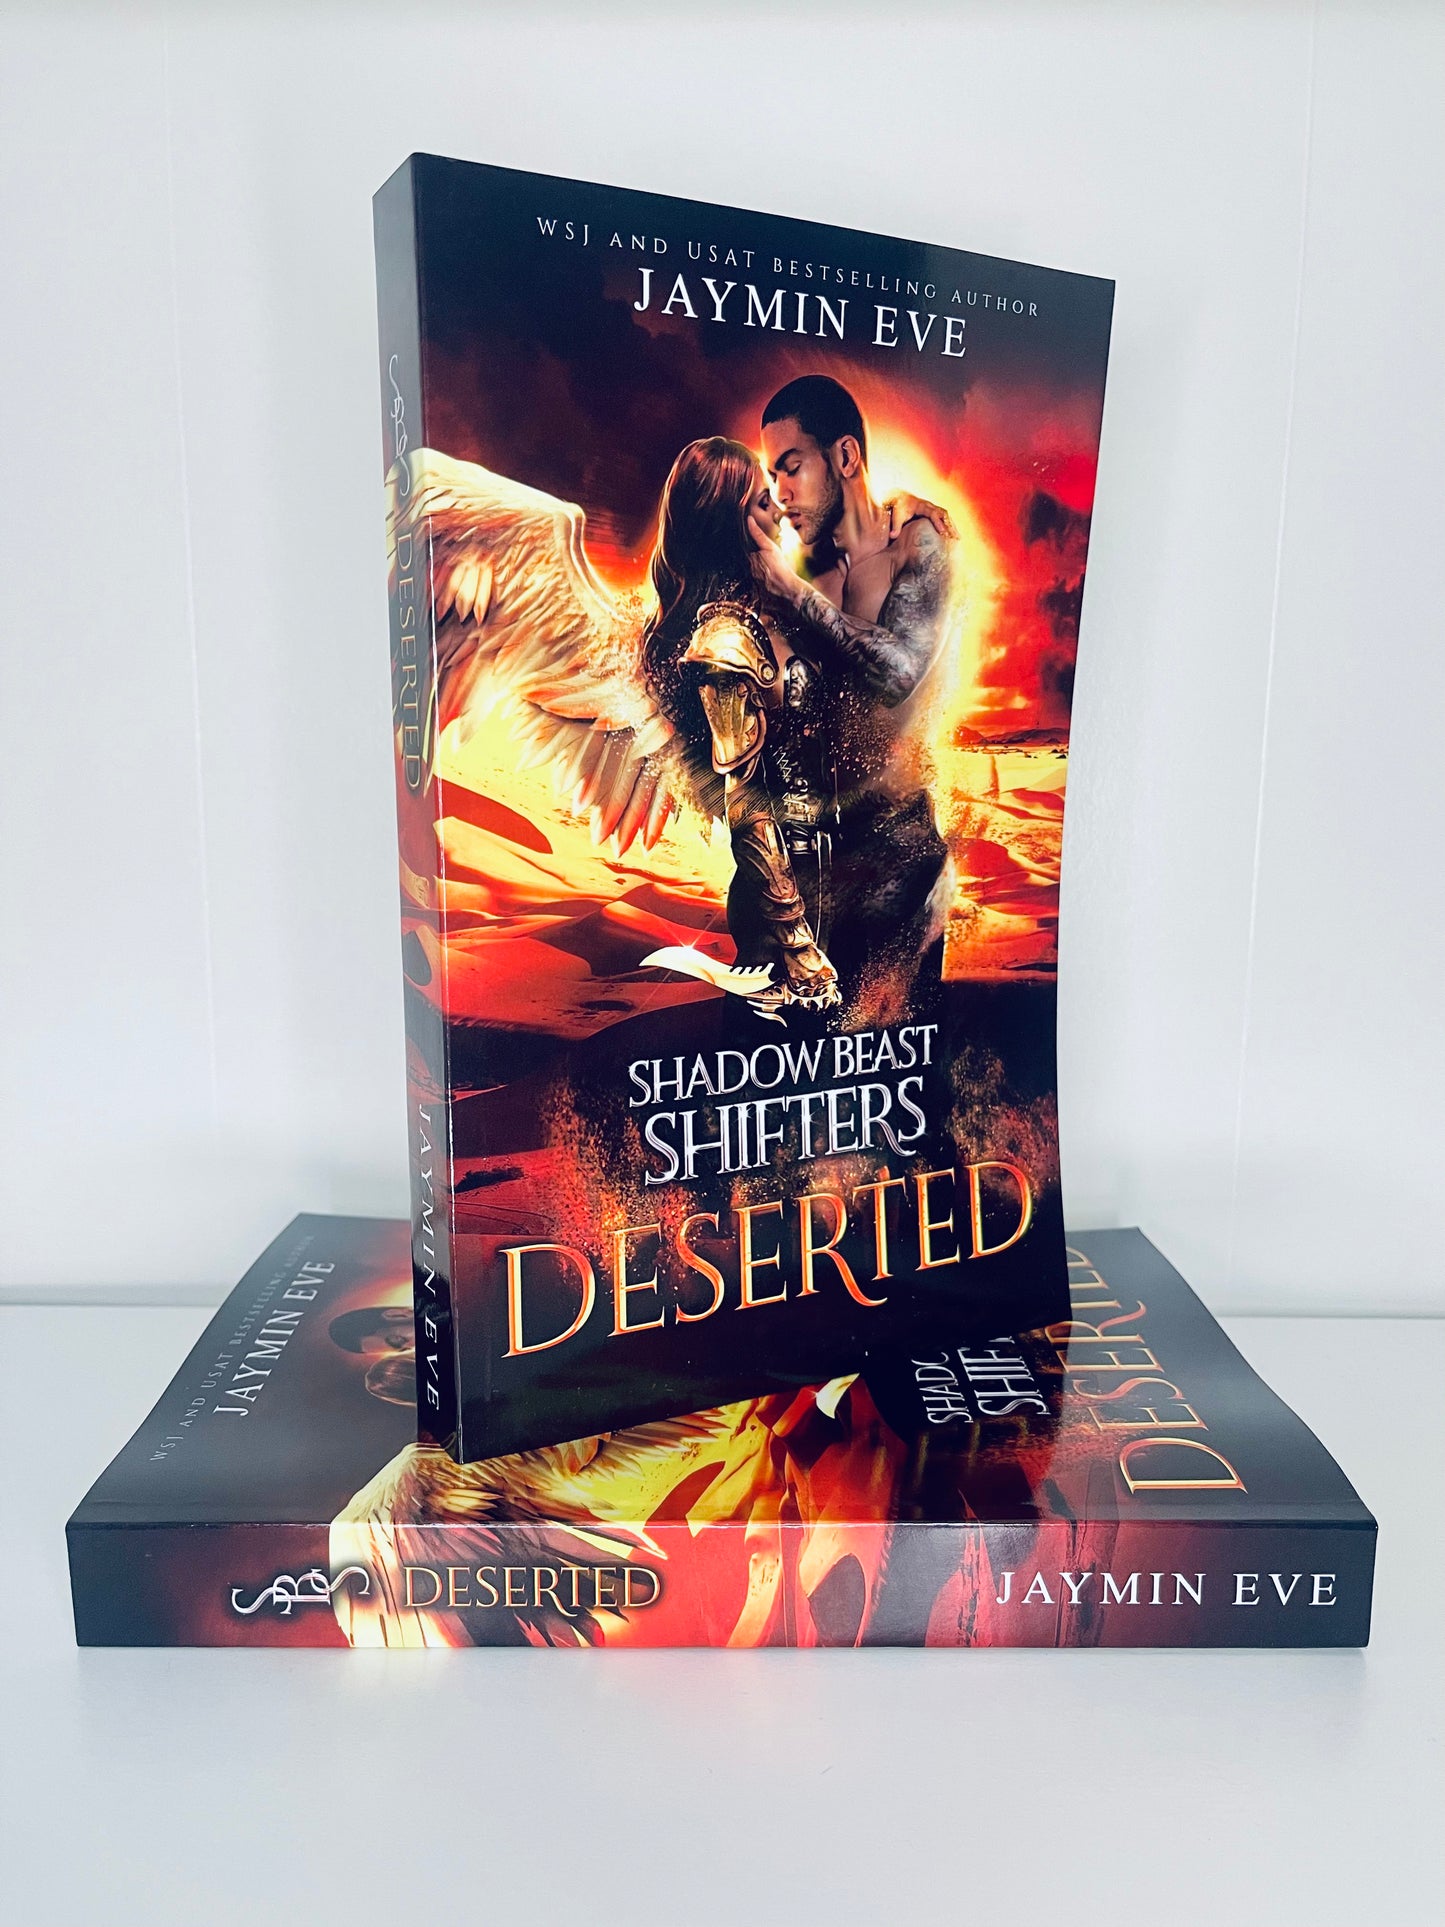 Deserted (Shadow Beast Shifters Book 4) by Jaymin Eve